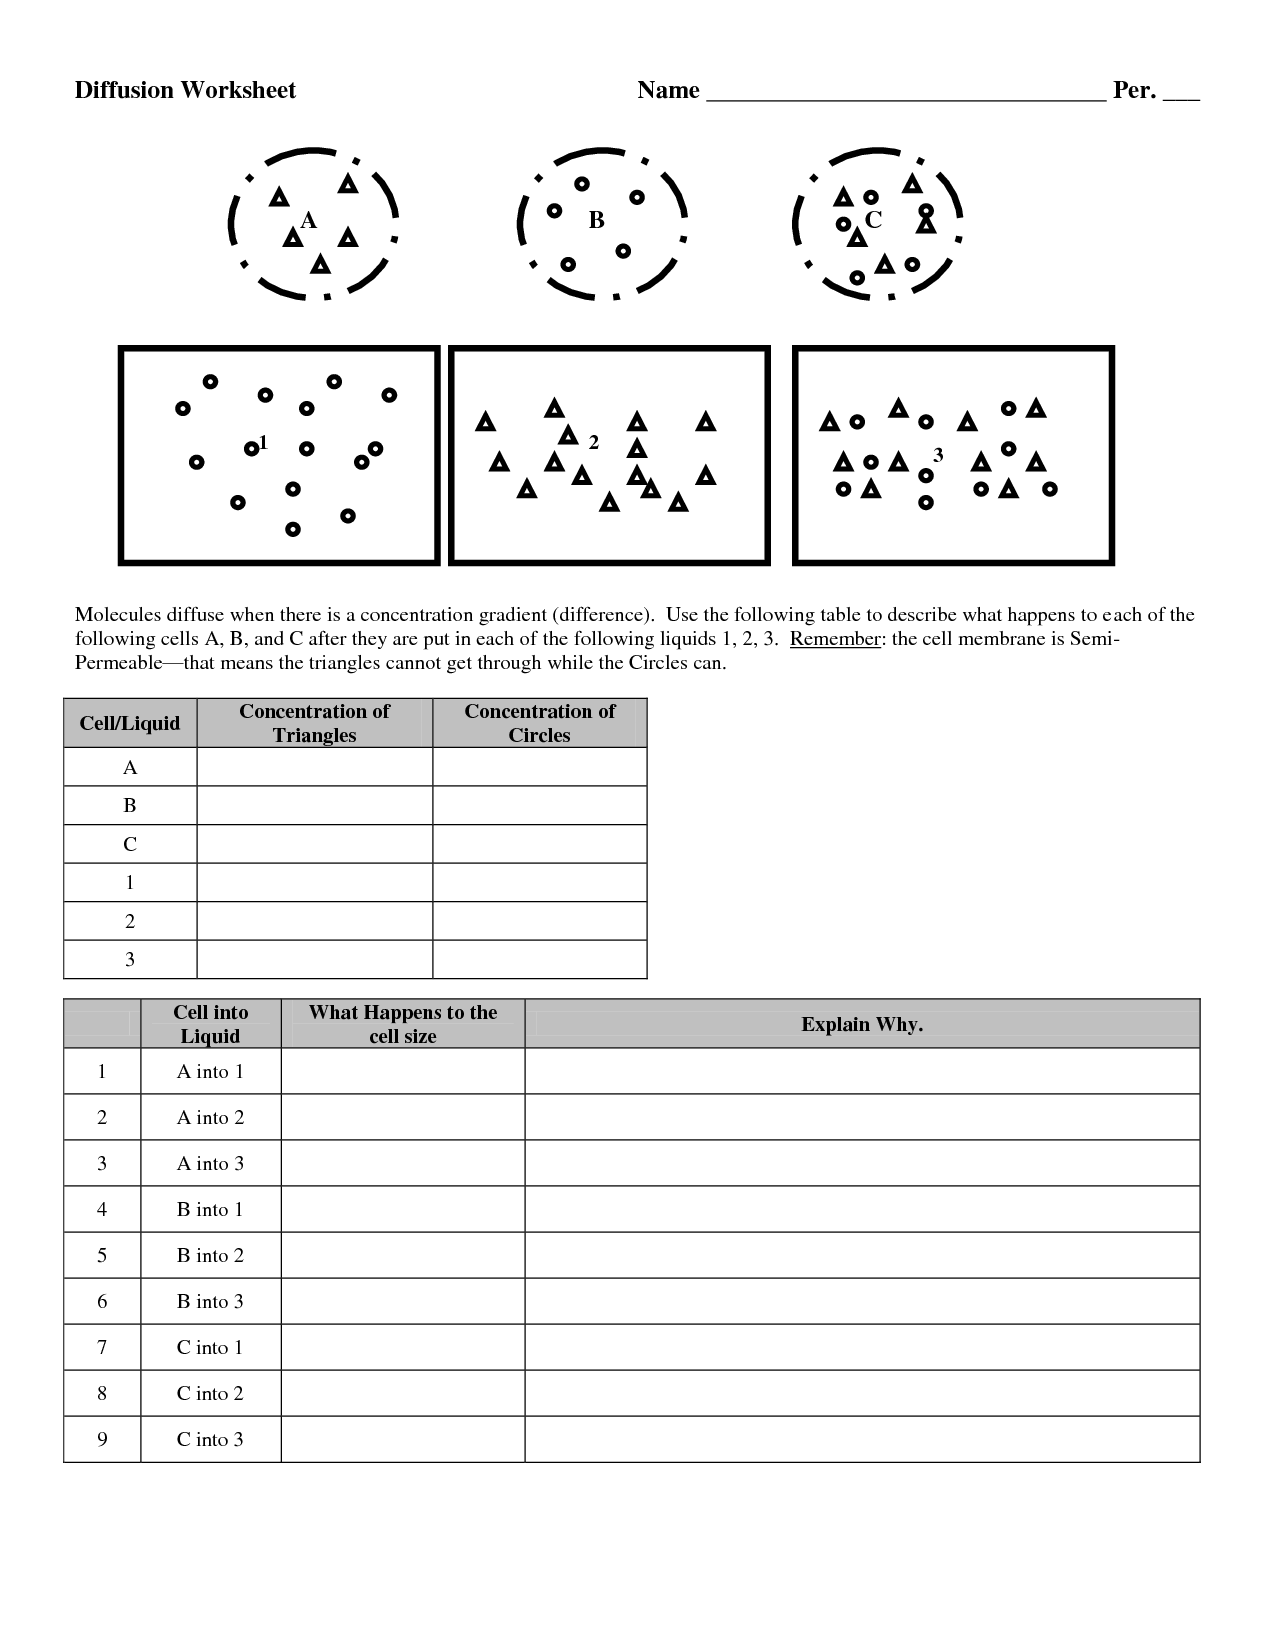 17 Best Images of Active Transport Worksheet Answers  Diffusion and Osmosis Worksheet Answers 